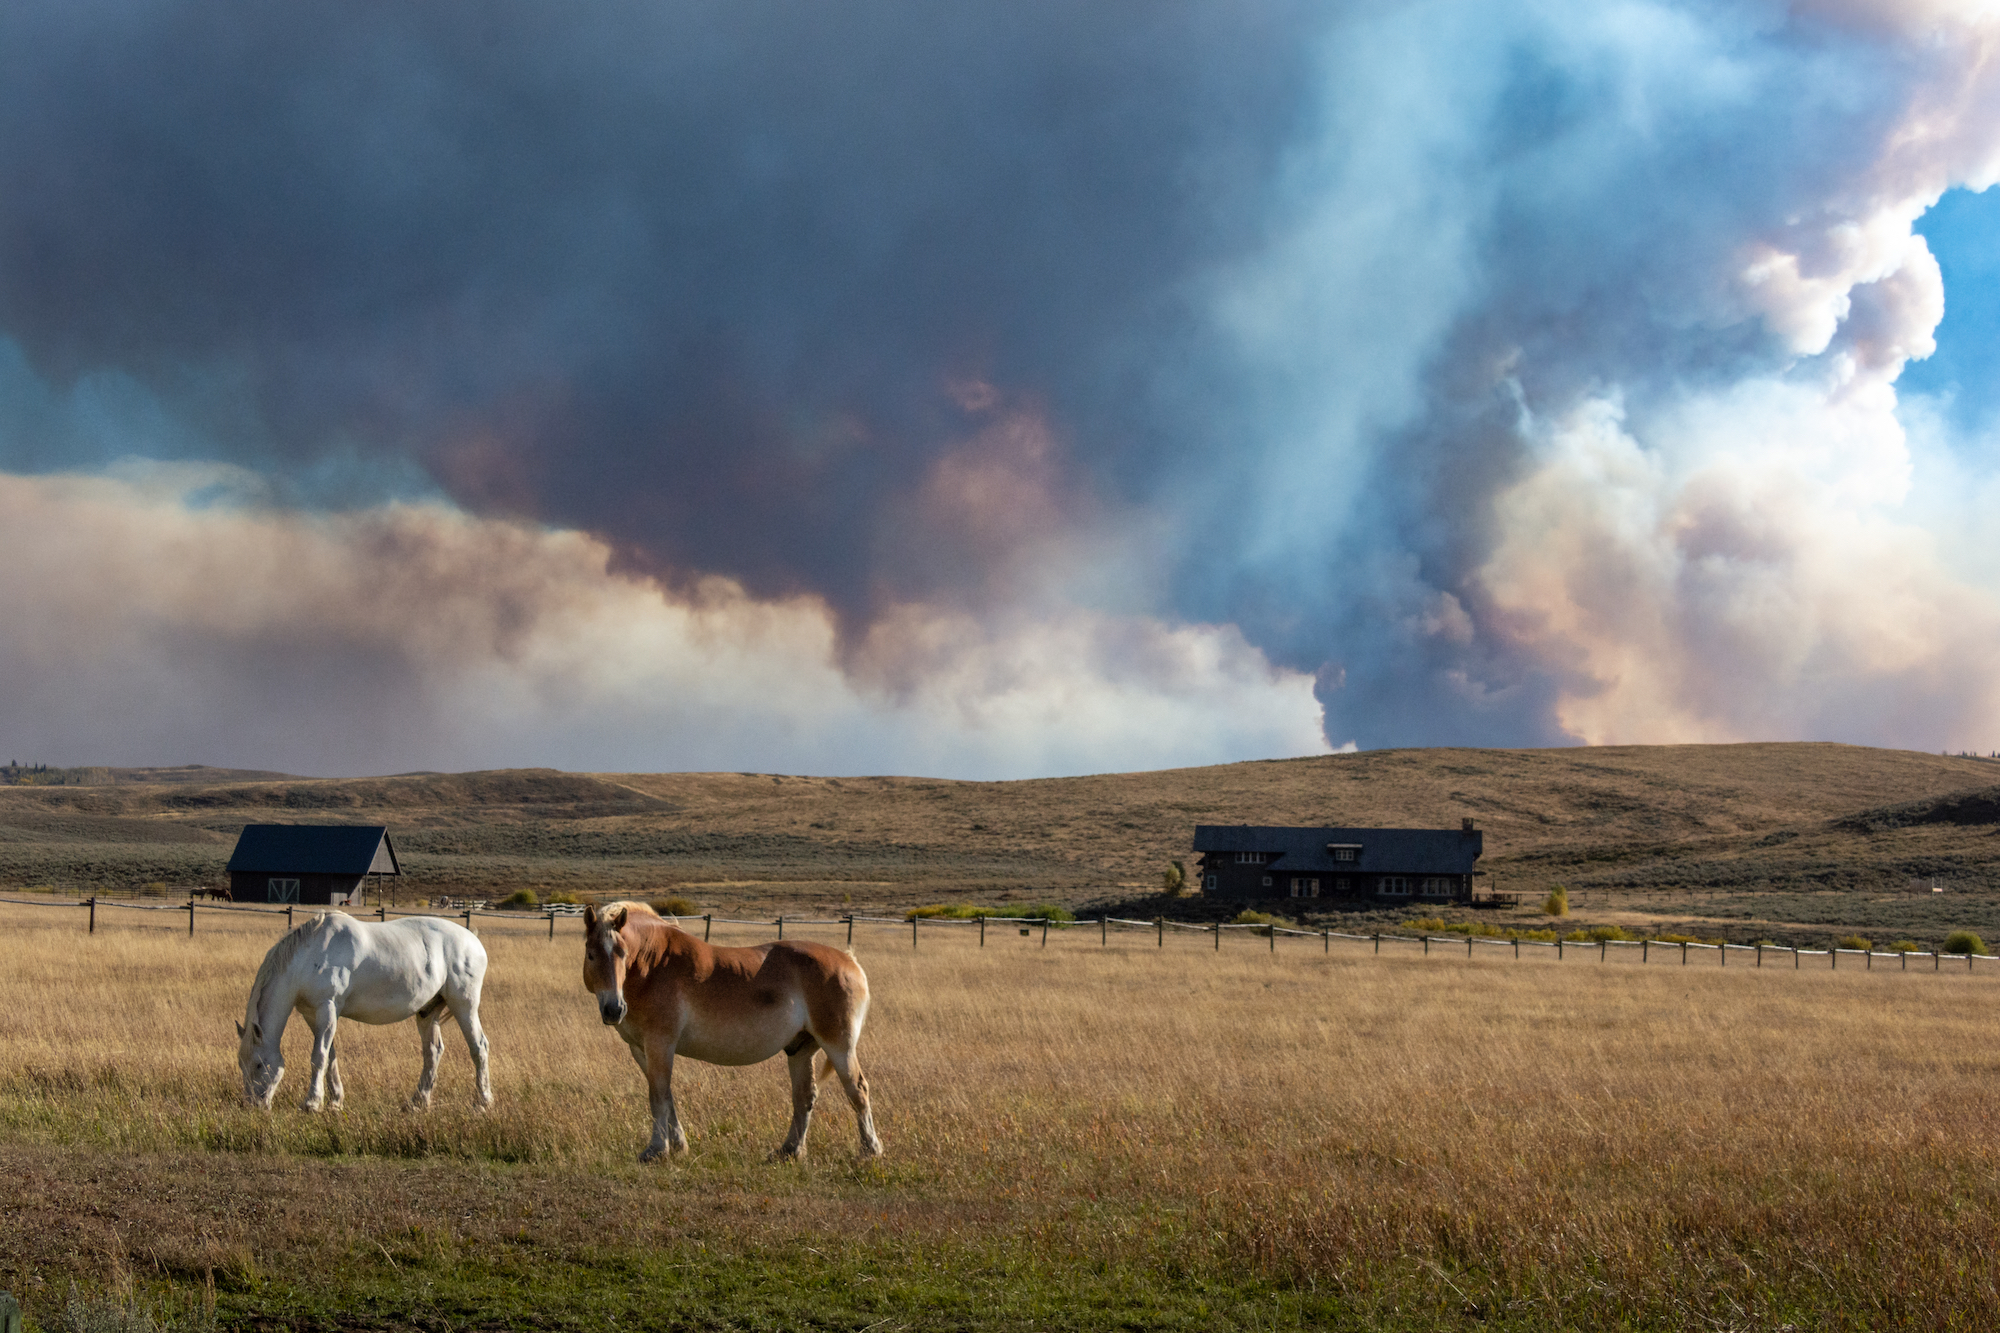 Horses in a dry field with smoke in the air.